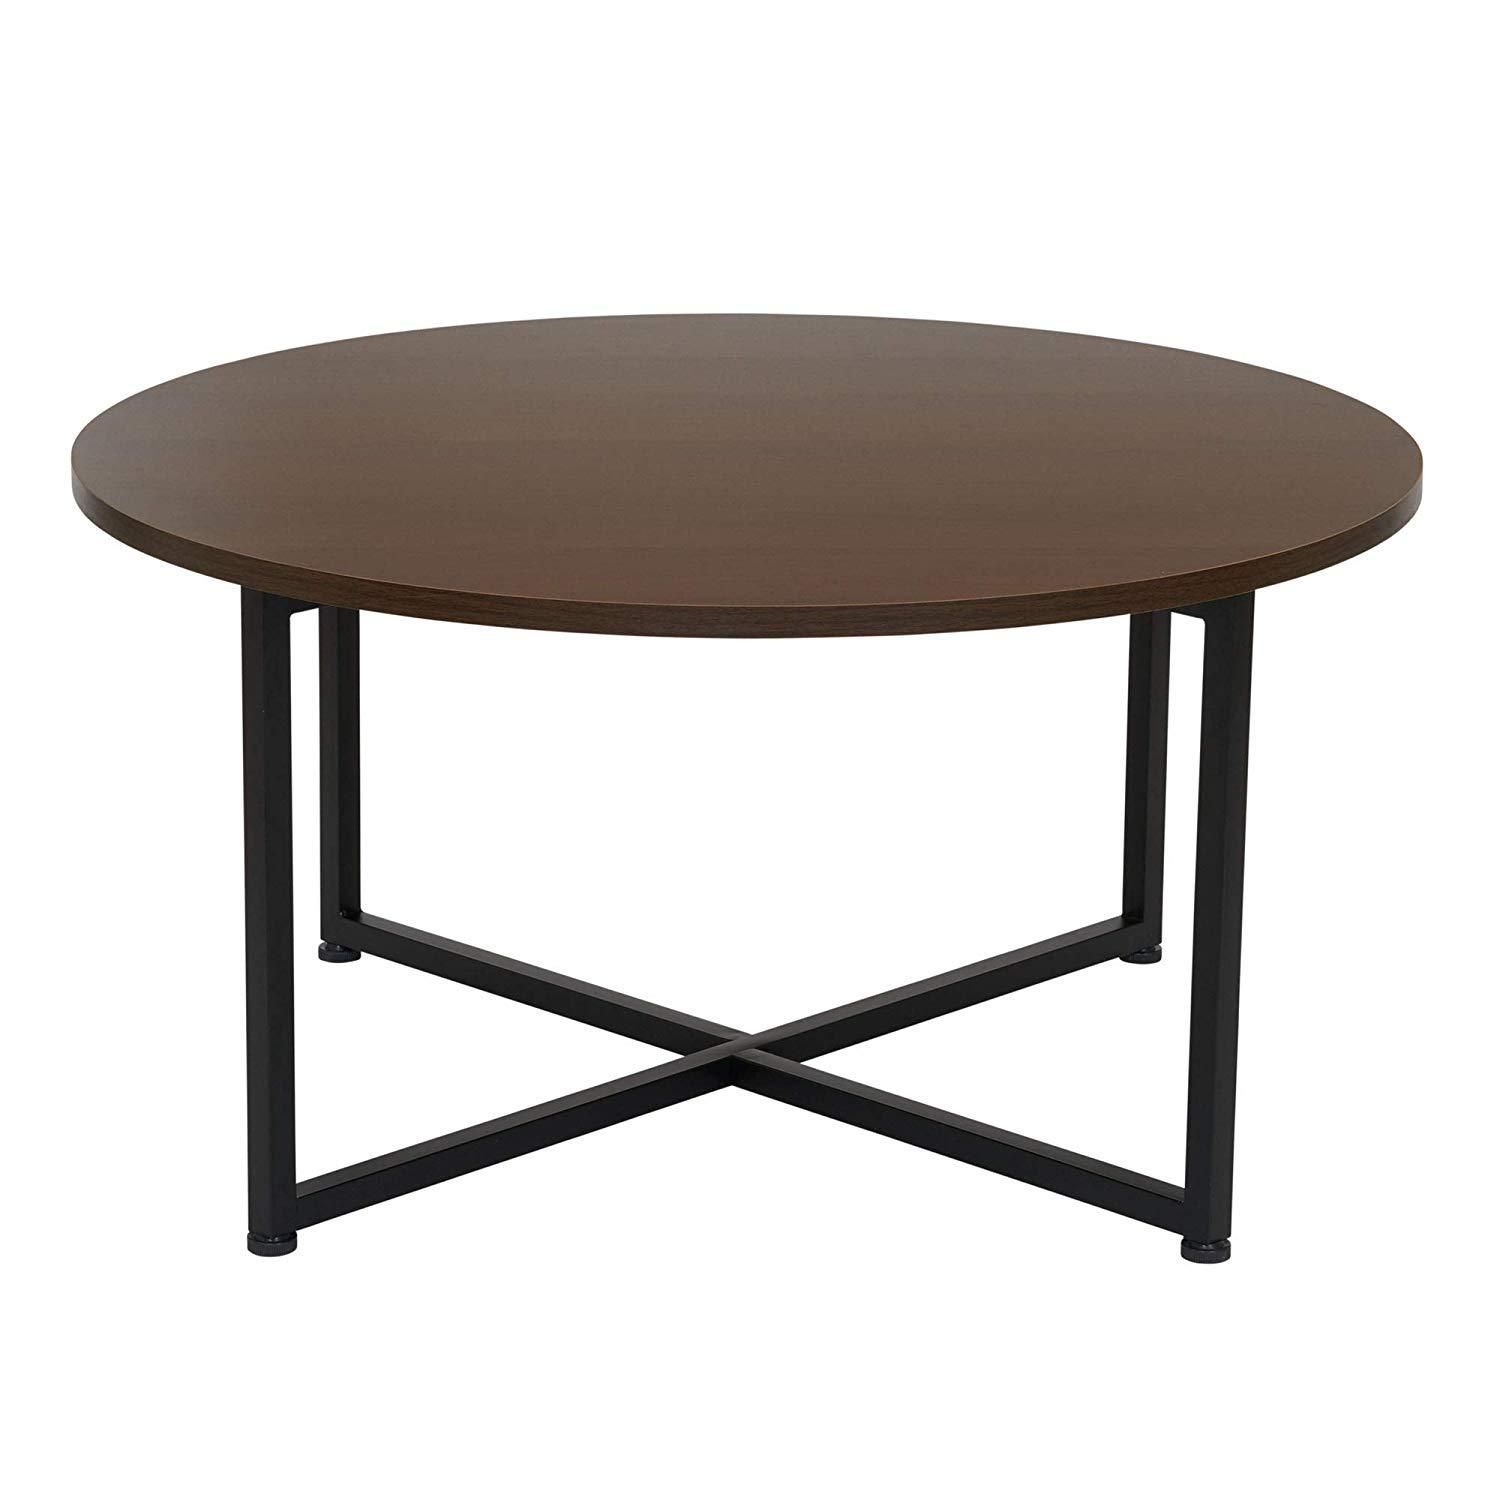 Round Coffee Table Wooden Metal Frame Living Room Furniture Home Office Regarding Round Coffee Tables With Steel Frames (View 14 of 21)